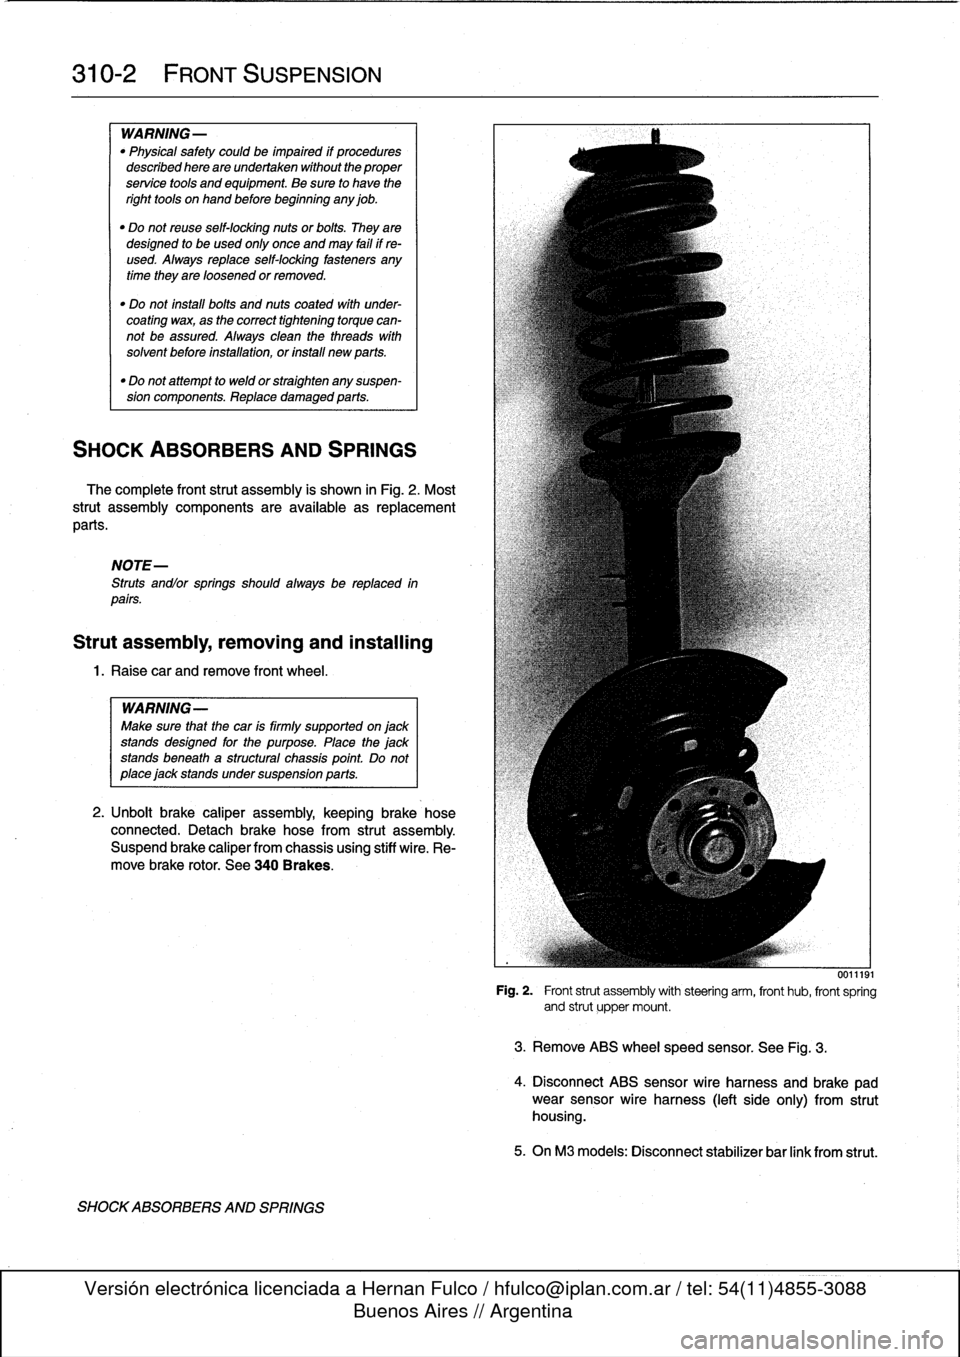 BMW 323i 1998 E36 Workshop Manual 
310-2

	

FRONT
SUSPENSION

WARNING-

"
Physical
safety
could
be
impaired
if
procedures
described
here
areundertaken
without
the
proper
service
tools
and
equipment
.
Be
sure
to
have
the
right
tools
o